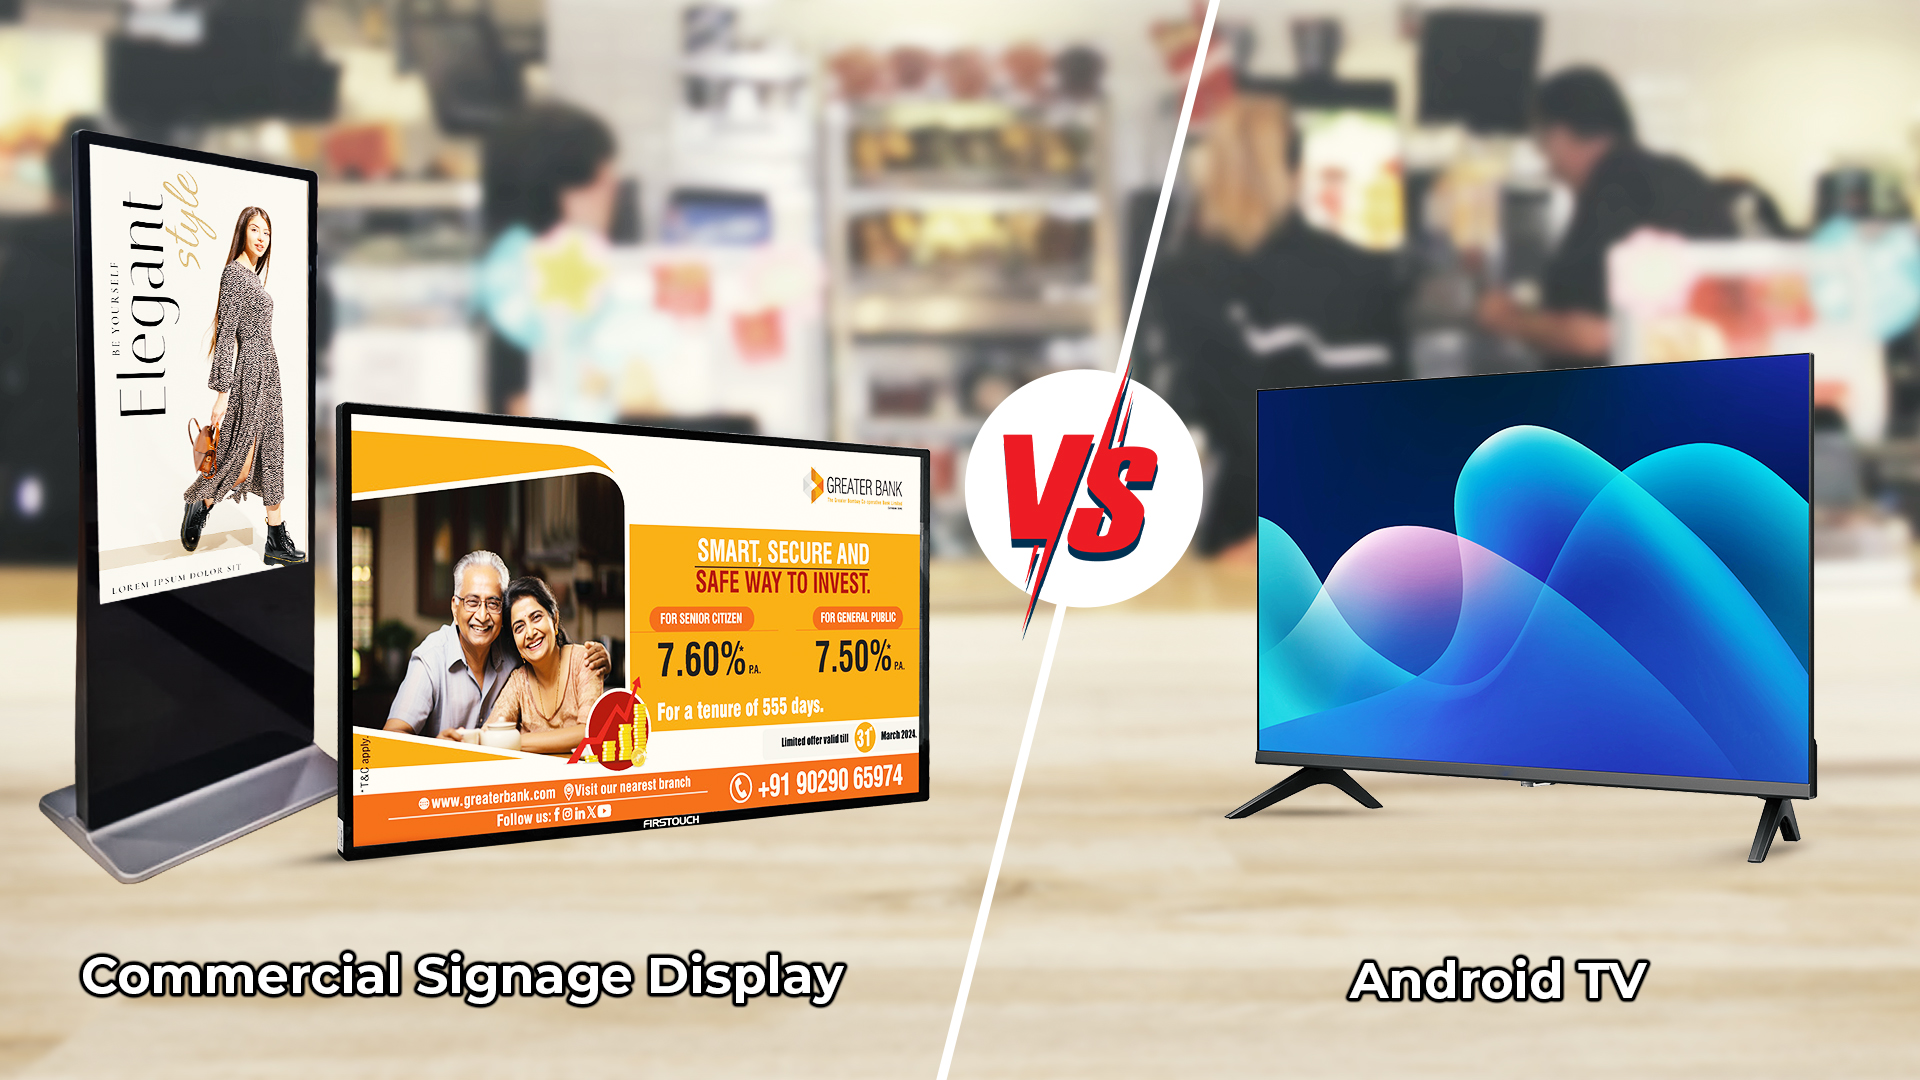 Difference between digital signage display vs android tv